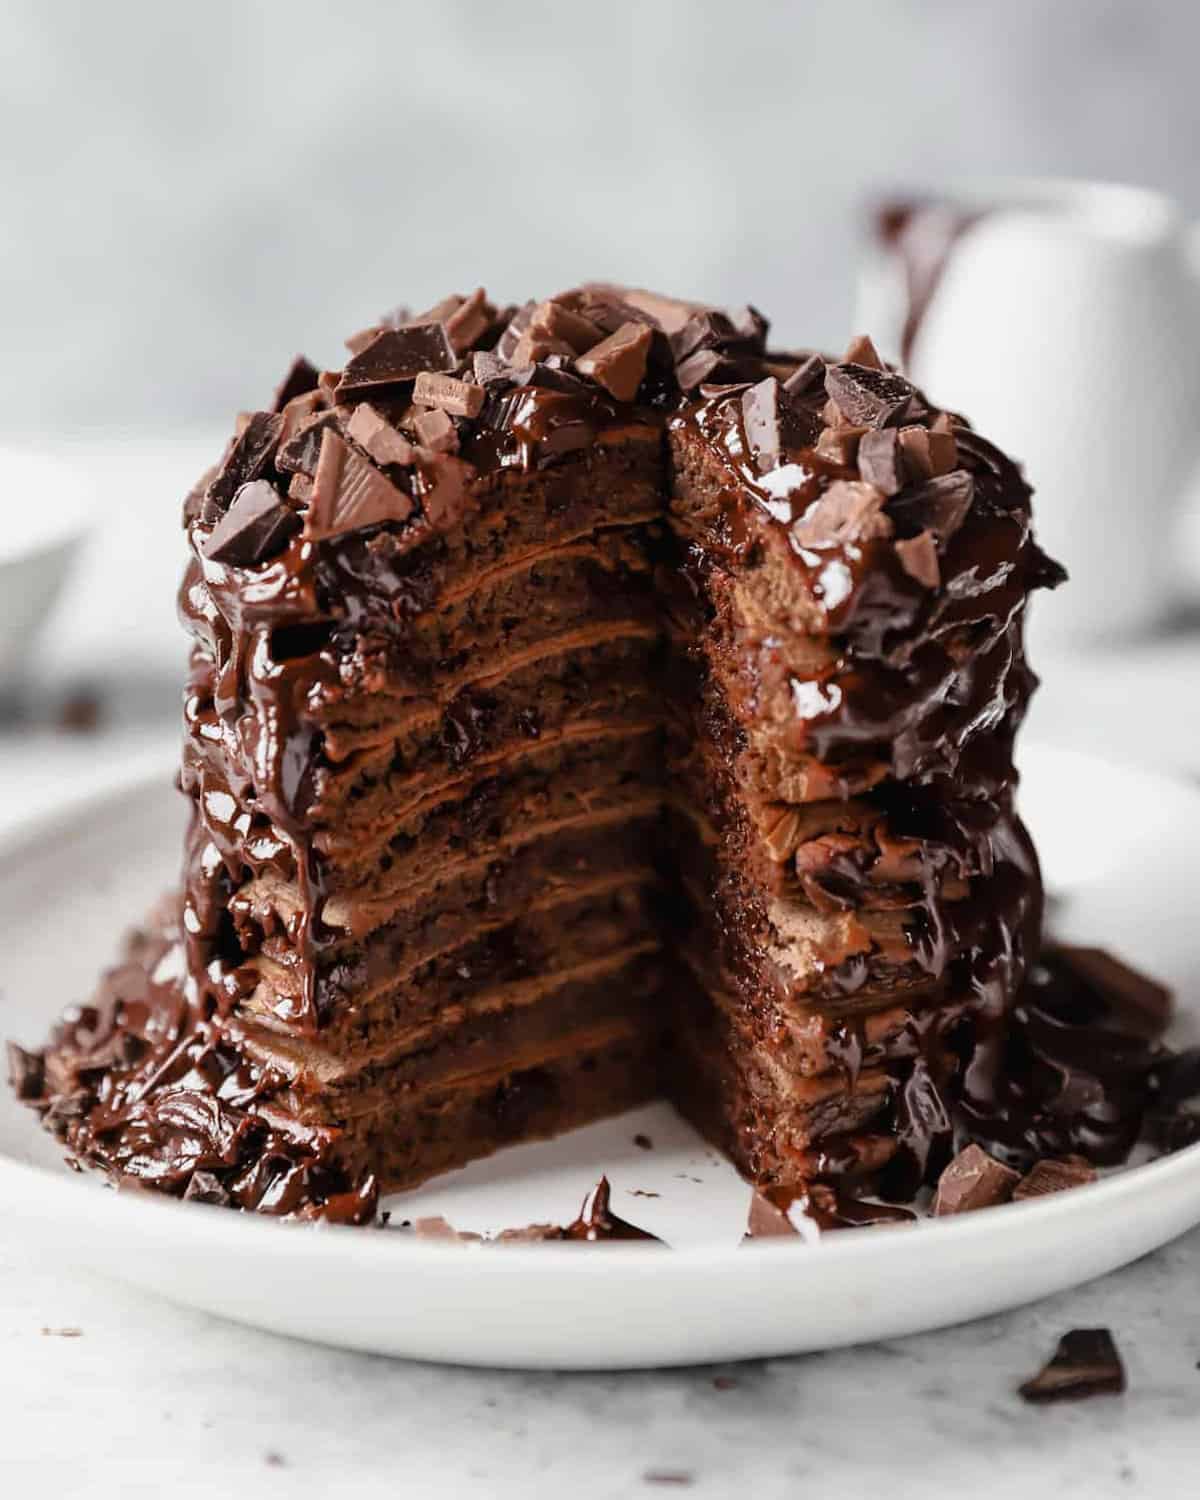 A delectable stack of chocolate pancakes, warm and fluffy, is delicately placed on a pristine plate.